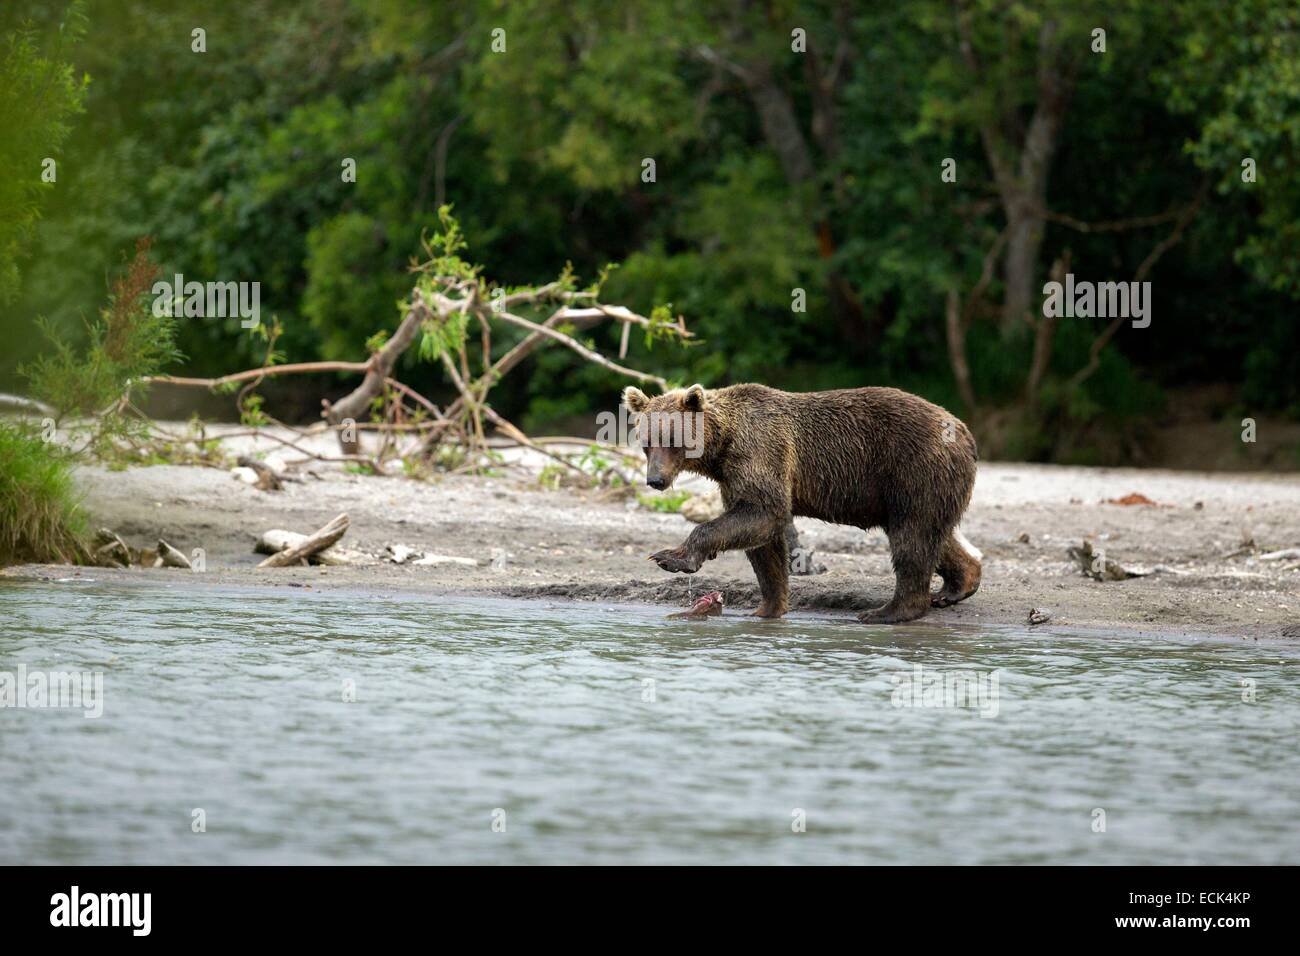 United States, Alaska, Katmai National Park and Preserve, Grizzly bear (Ursus arctos horribilis), catching salmon in the river Stock Photo